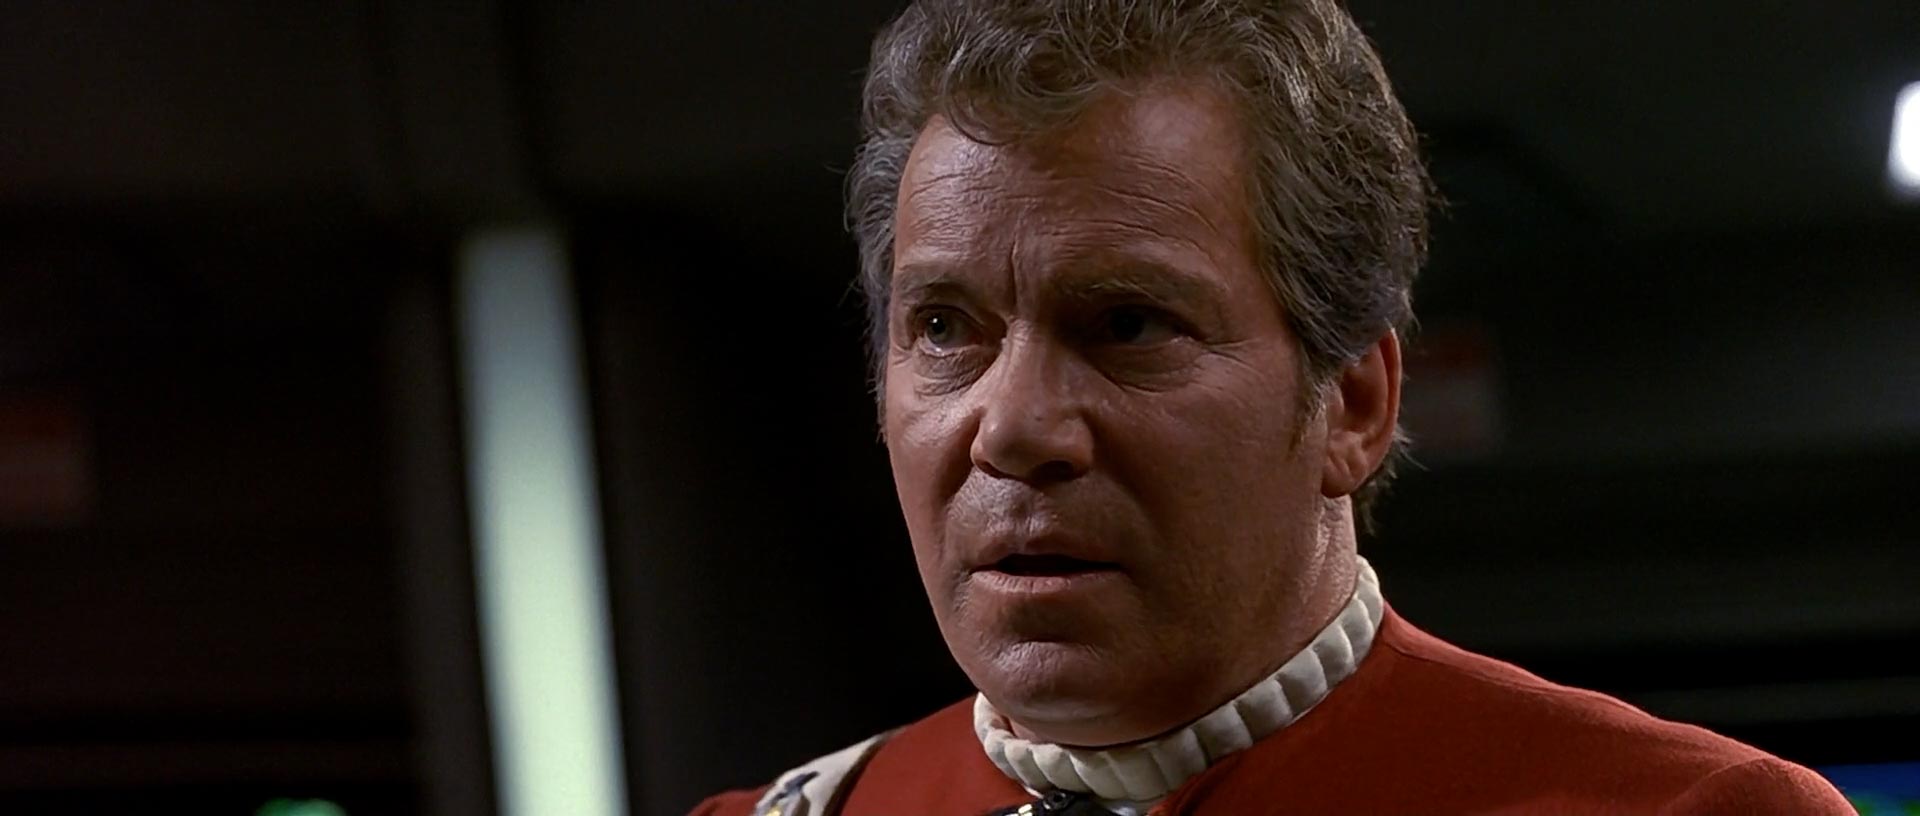 Star Trek VI: The Undiscovered Country Screen 2